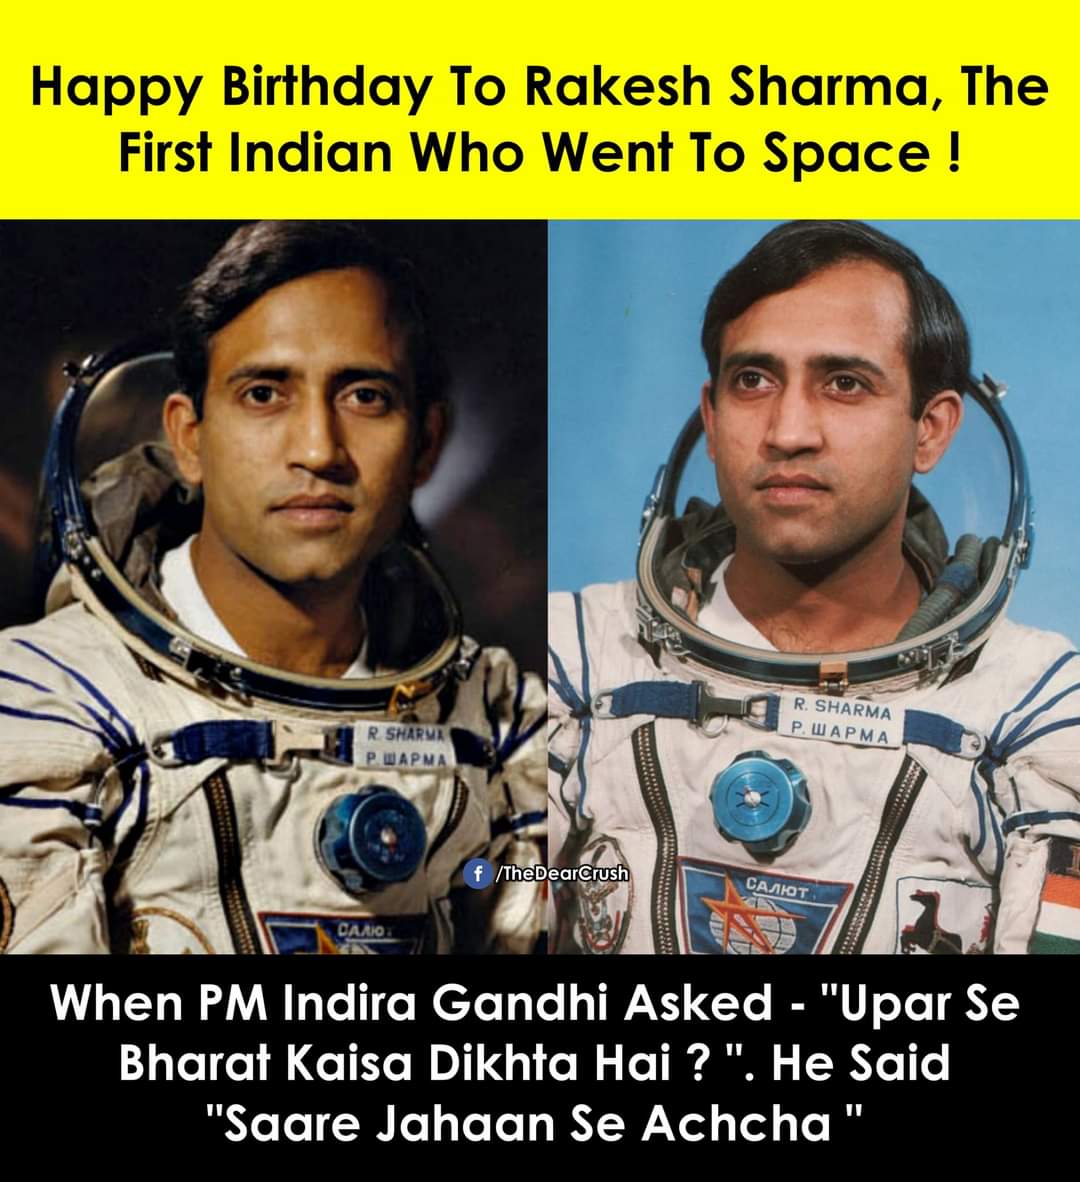 Happy Birthday To Rakesh Sharma, The First Indian Who Went To Space! - 